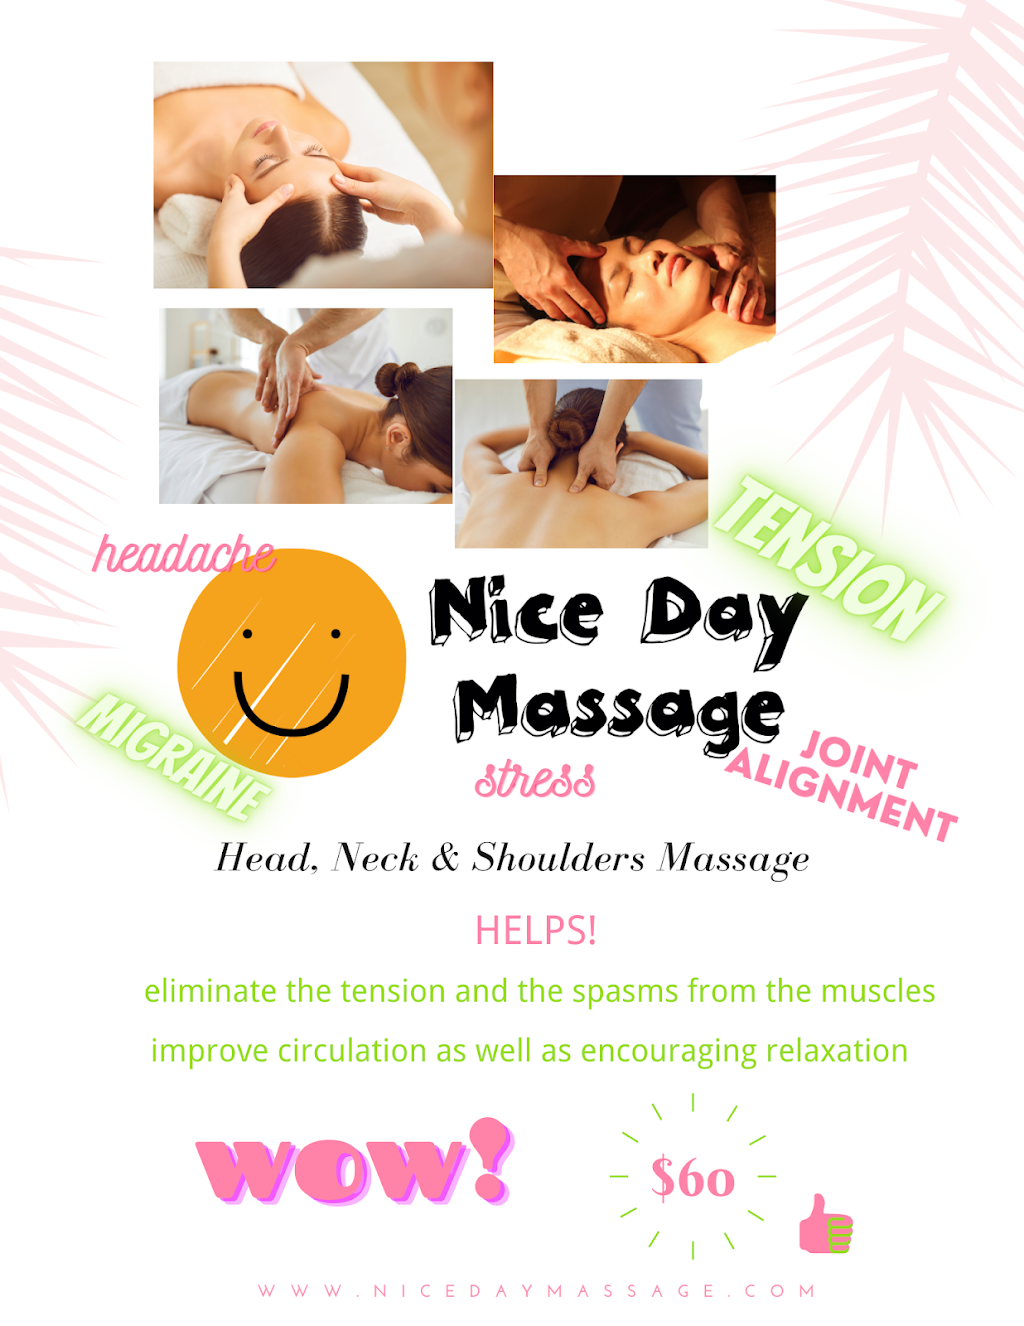 Nice day massage | The Cannery Rosebery office 8, level one, 61, Mentmore Ave, Rosebery NSW 2018, Australia | Phone: 0405 602 638